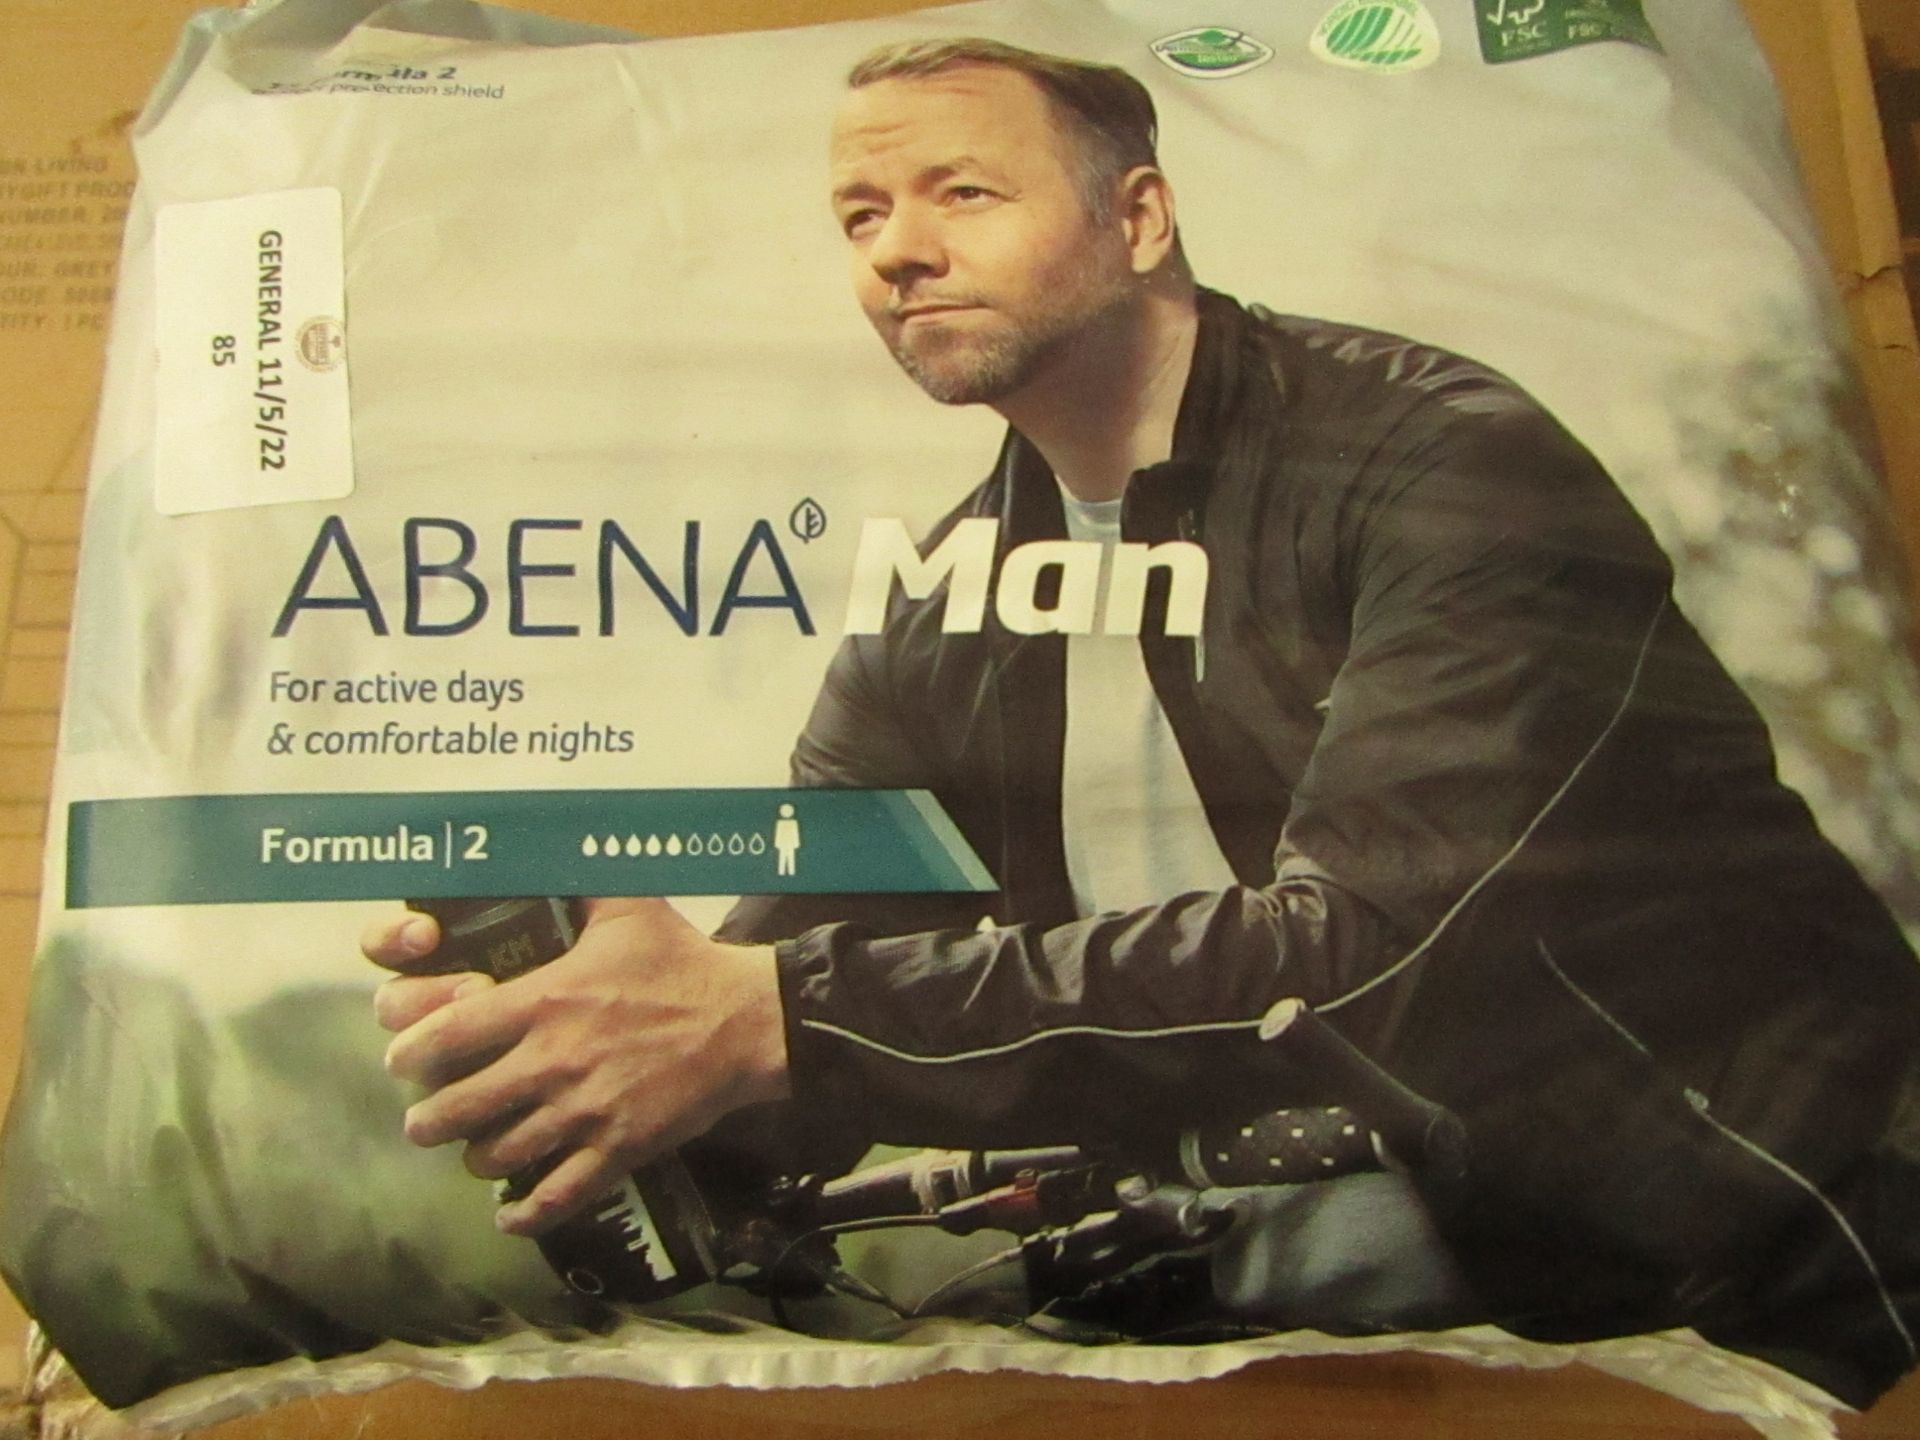 3x Packs of Abena Man Incontinence Pads - Unchecked & Packaged